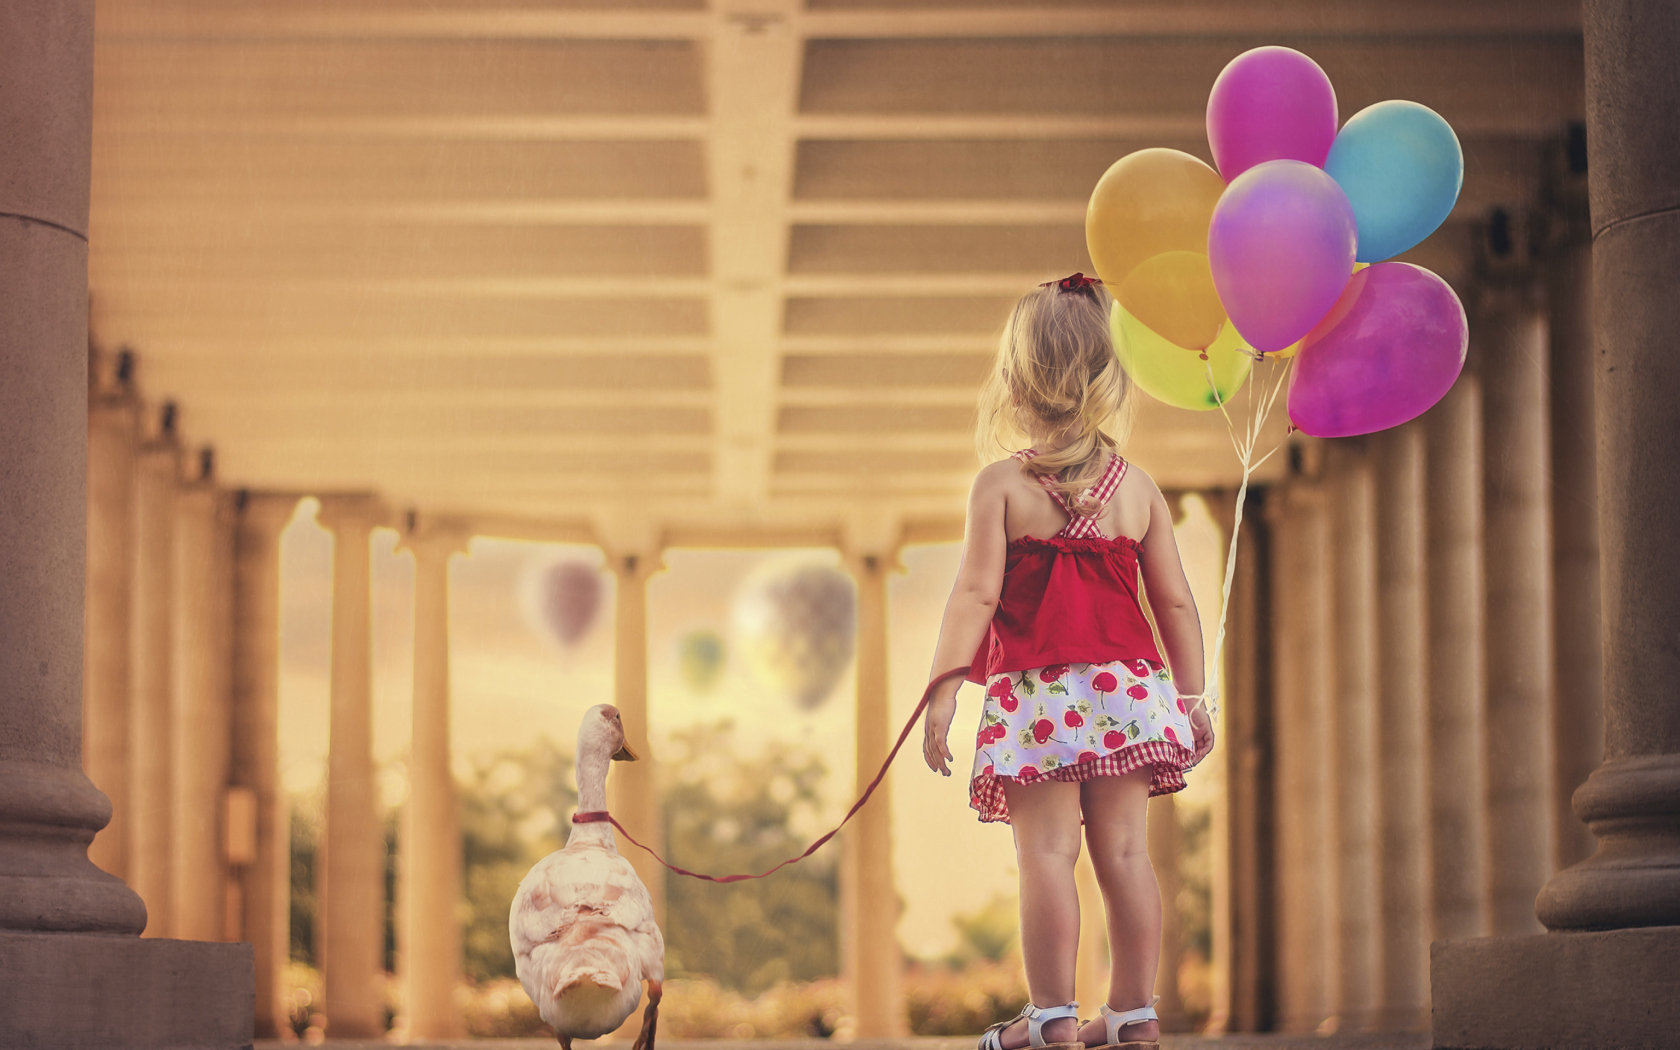 Little Girl With Colorful Balloons wallpaper 1680x1050